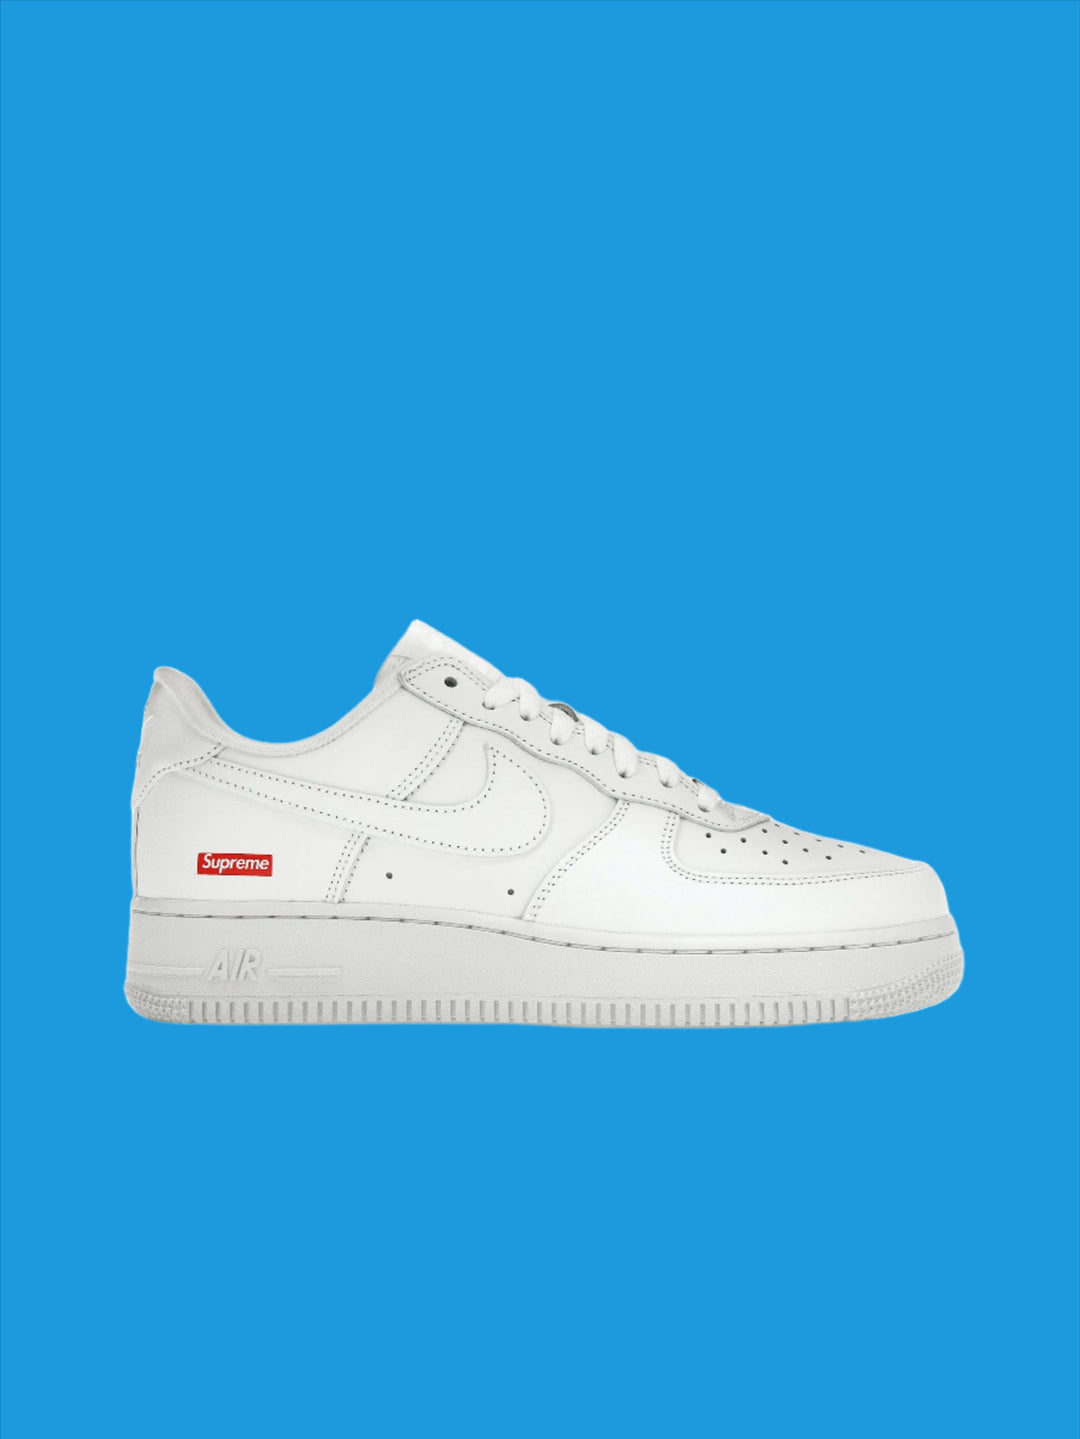 Nike Air Force 1 Low Supreme White in Auckland, New Zealand - Shop name